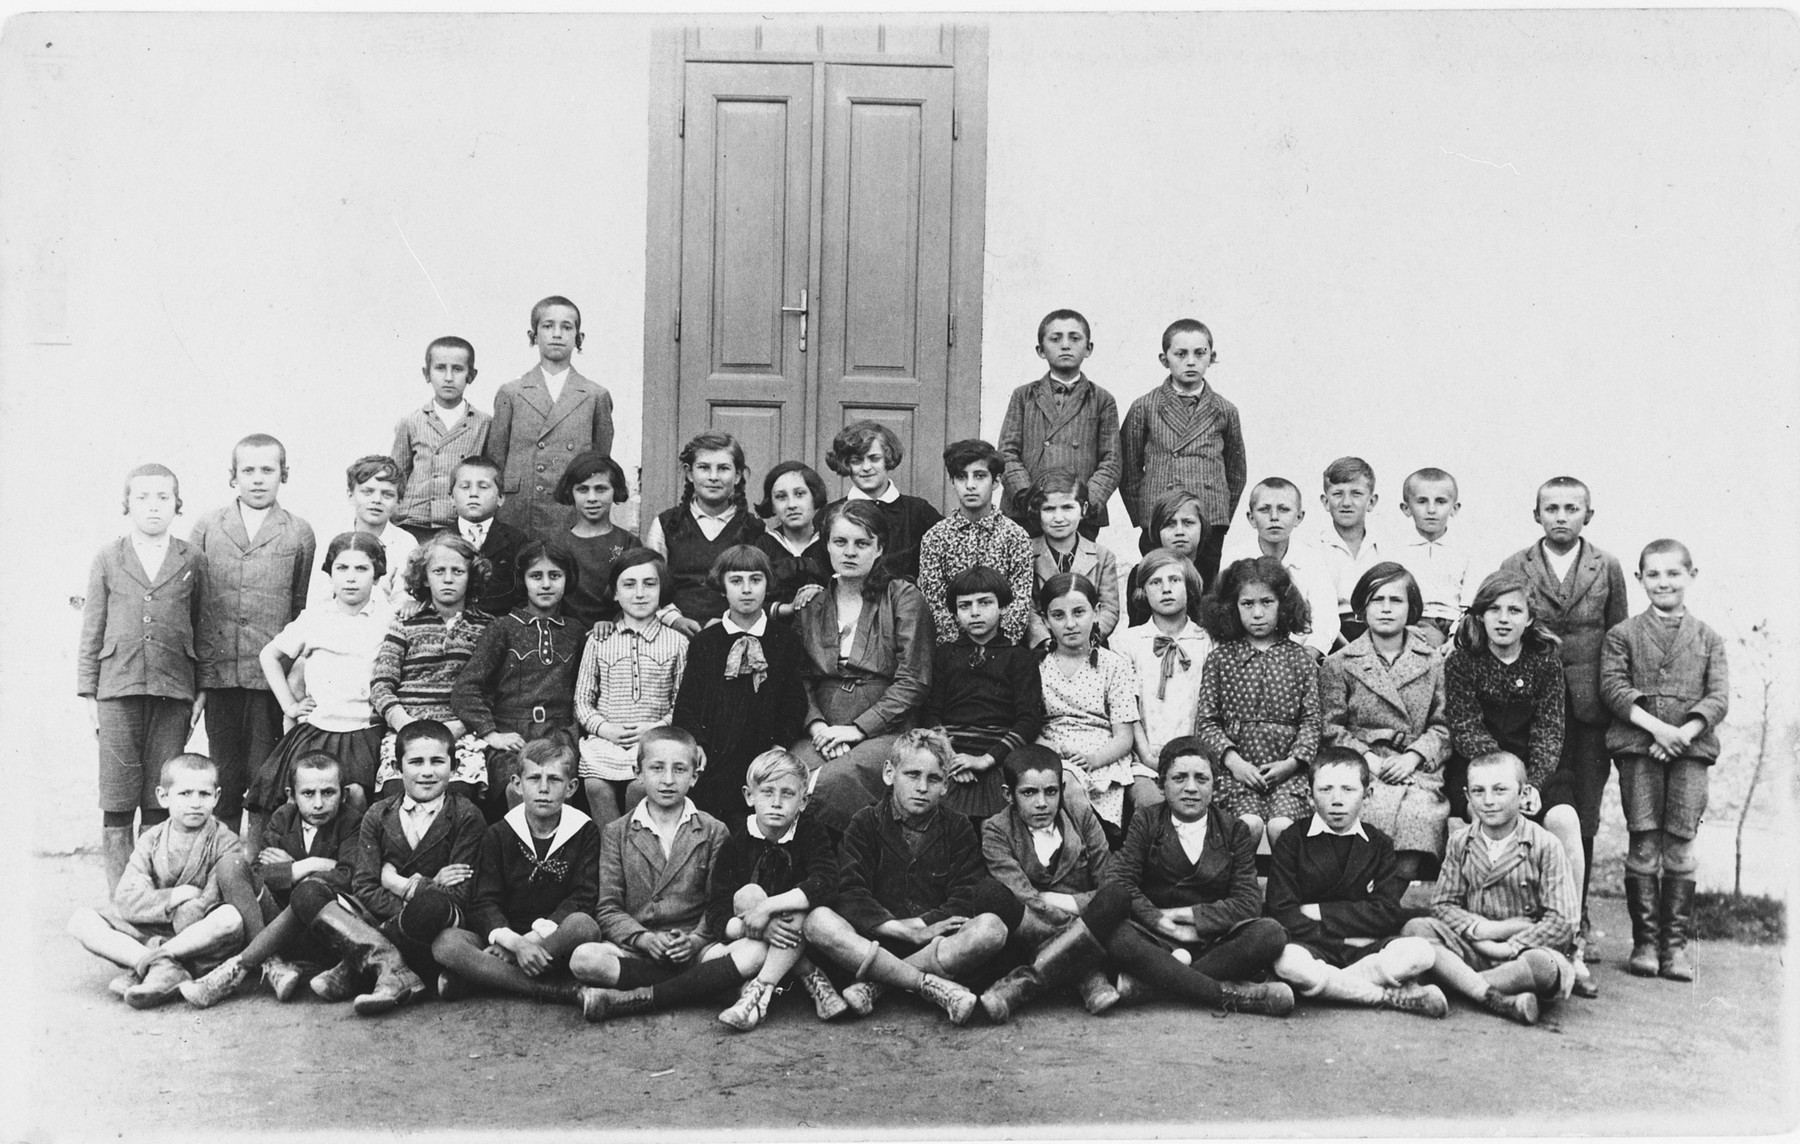 Group portrait of Jewish and non-Jewish children in a public school in Tacovo.

Among those pictured is Goldie Berger.